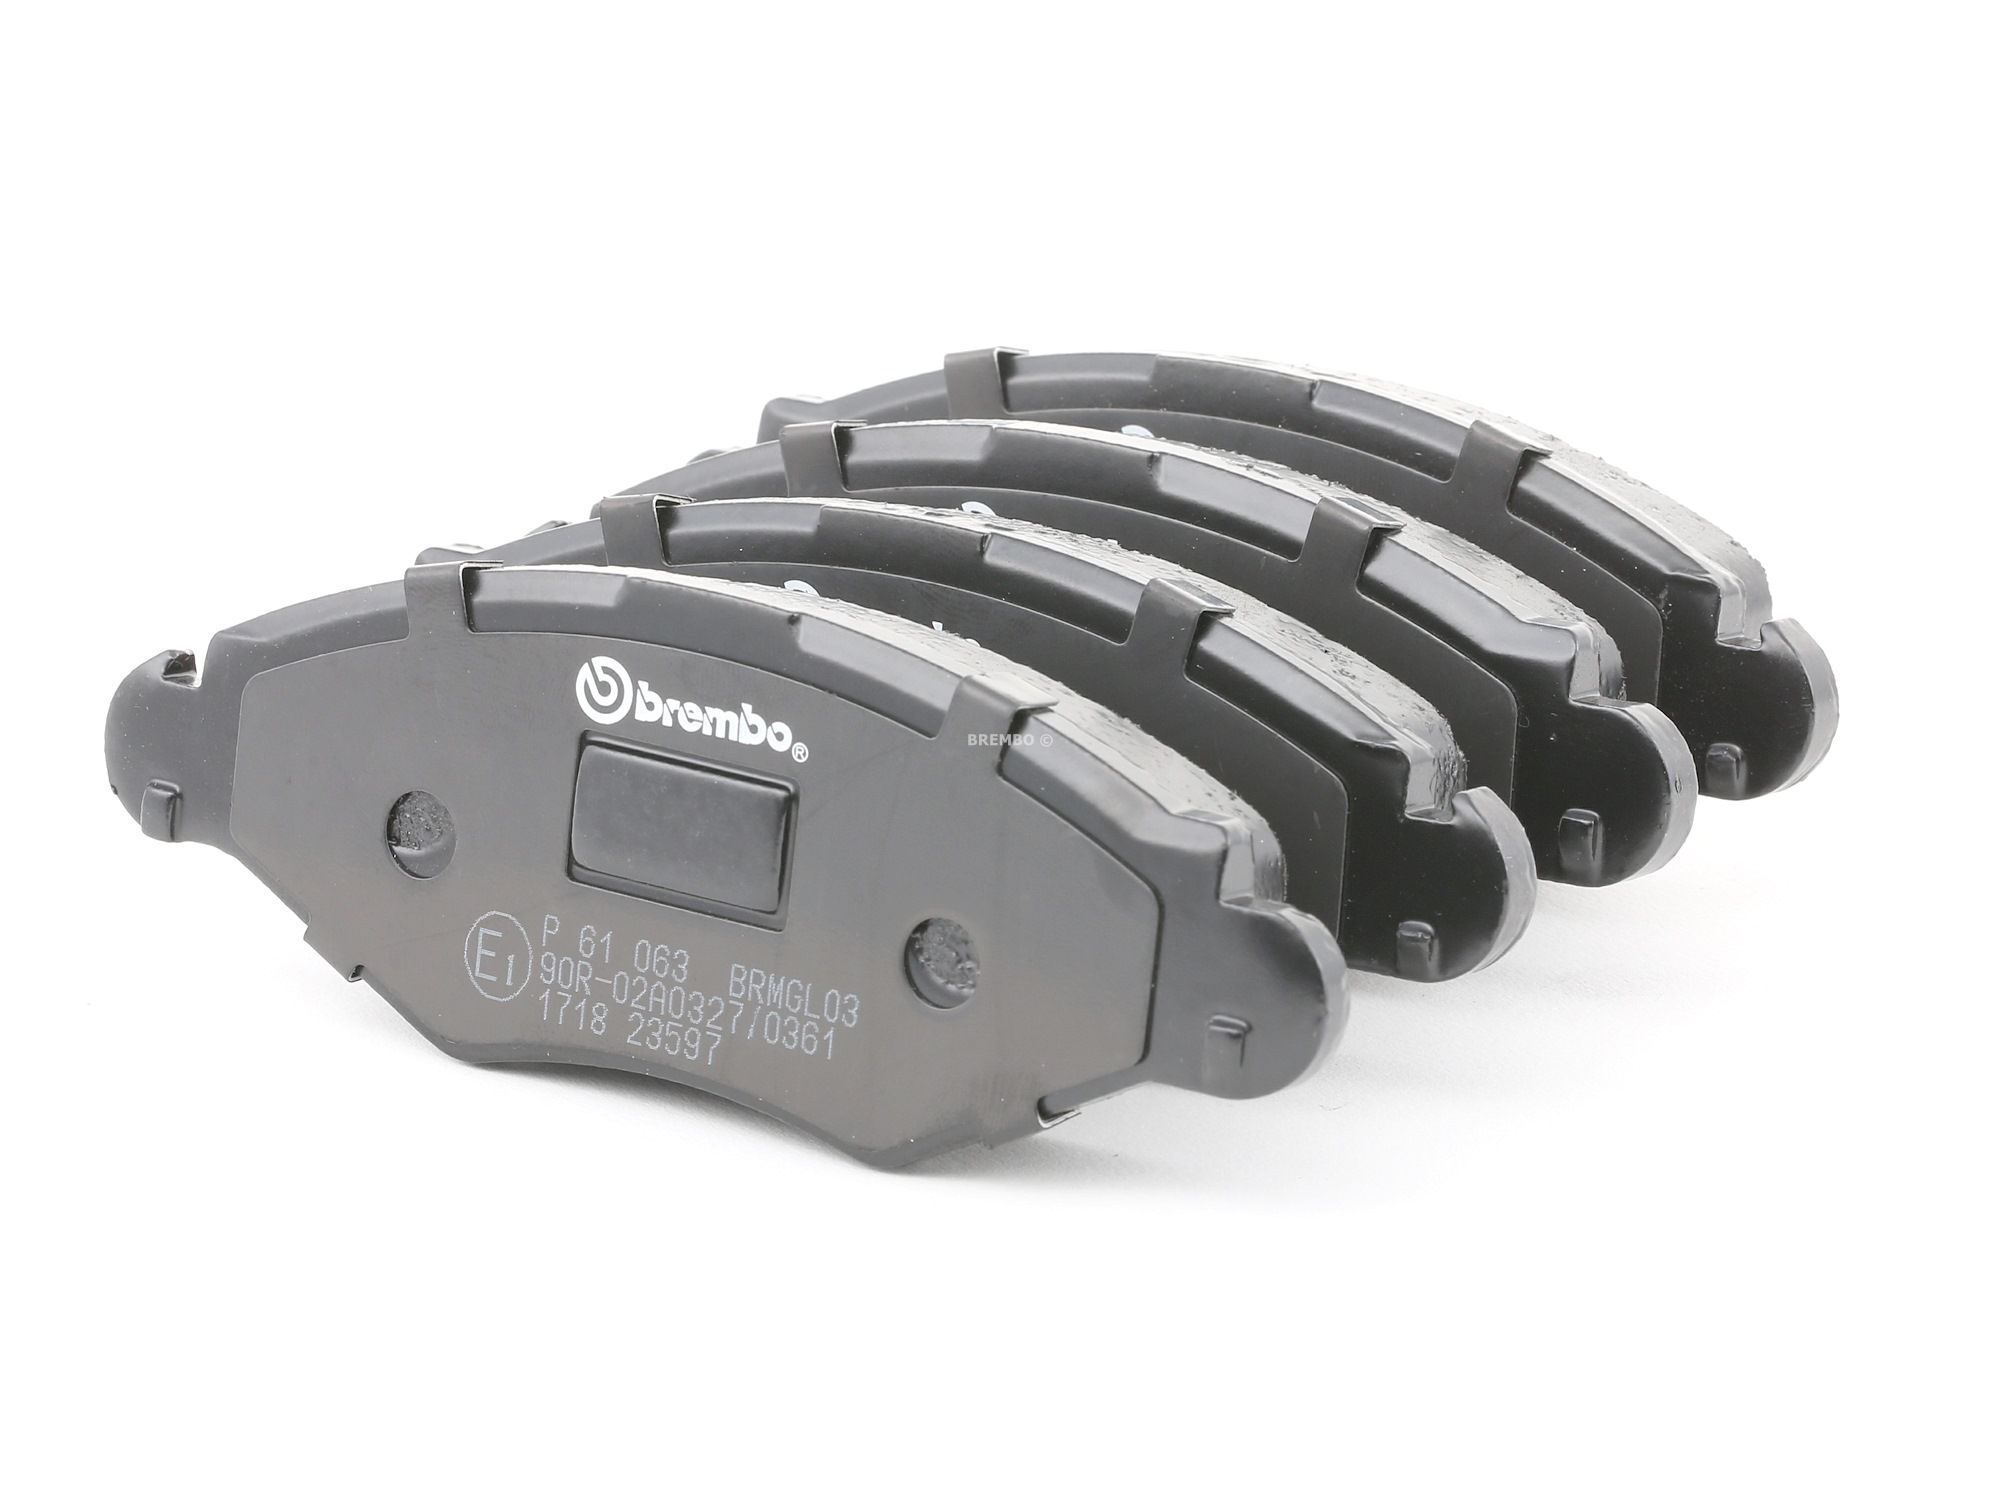 BREMBO P 61 063 Brake pad set excl. wear warning contact, with brake caliper screws, with accessories